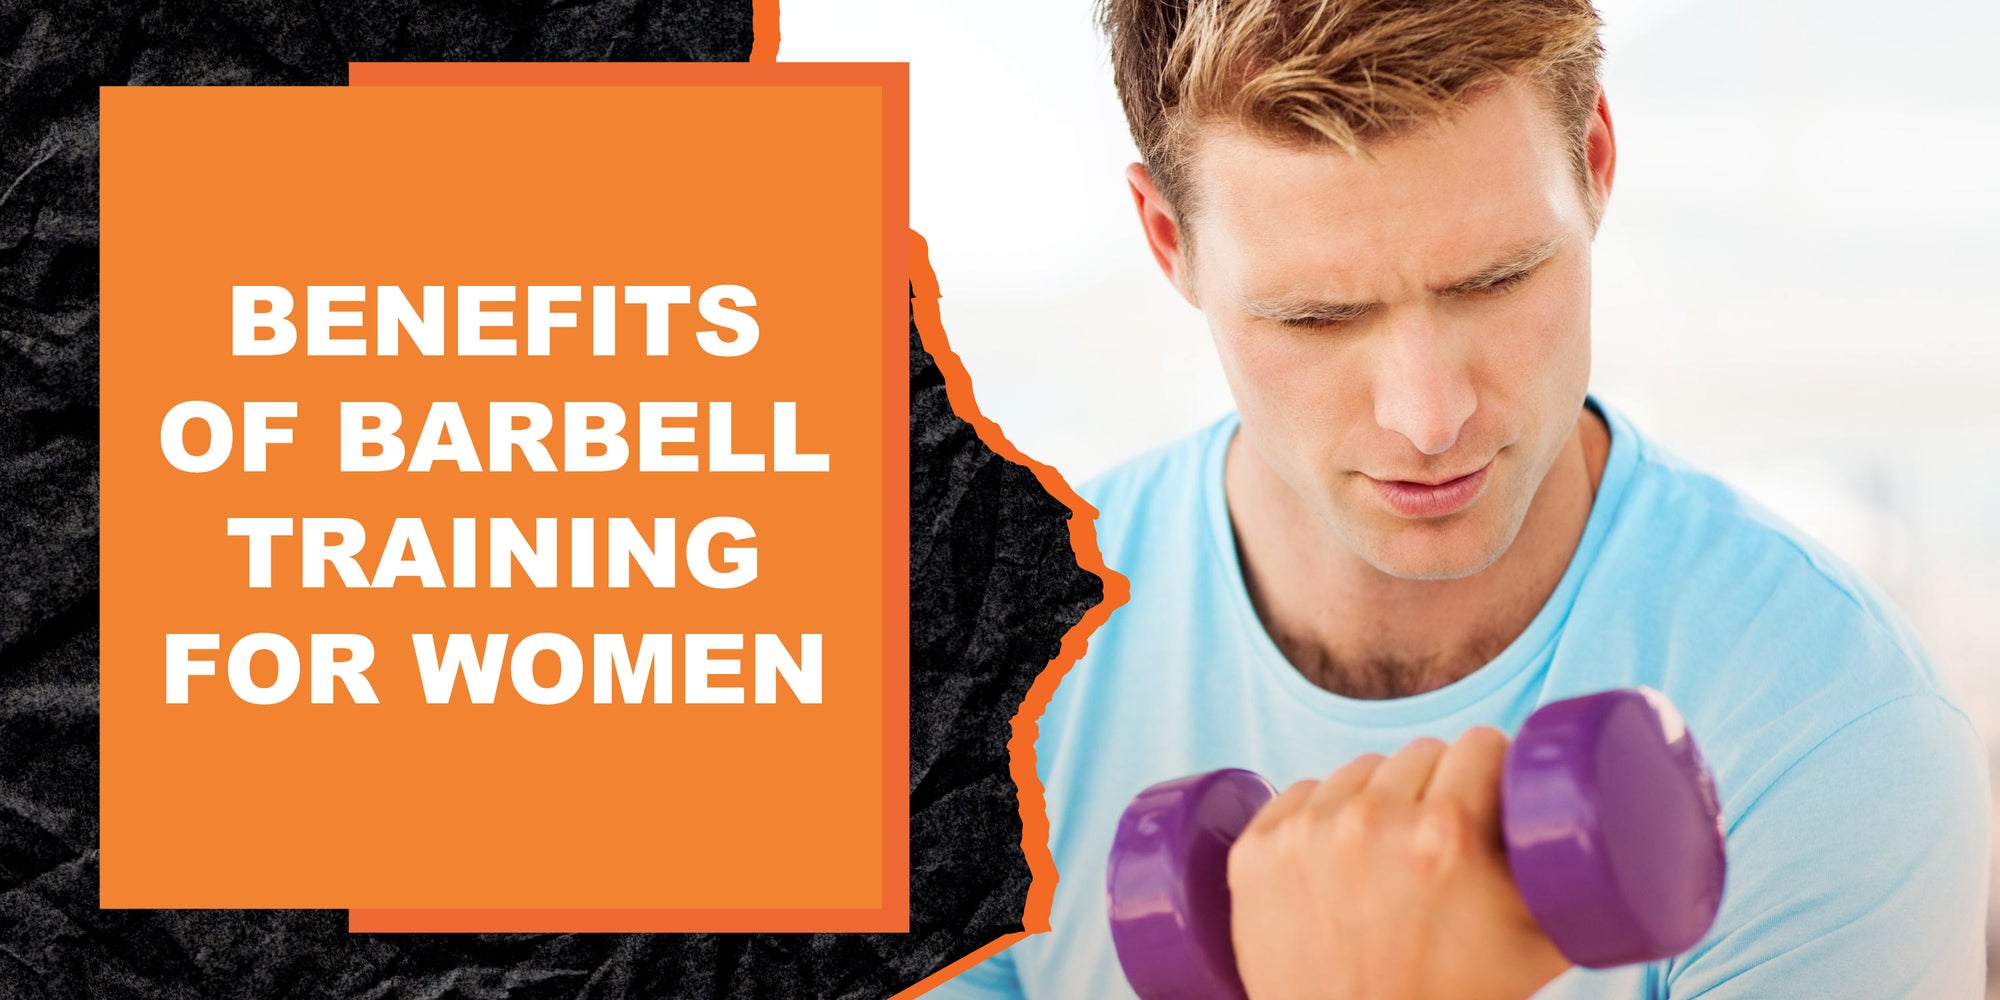 Benefits of Barbell Training for Women